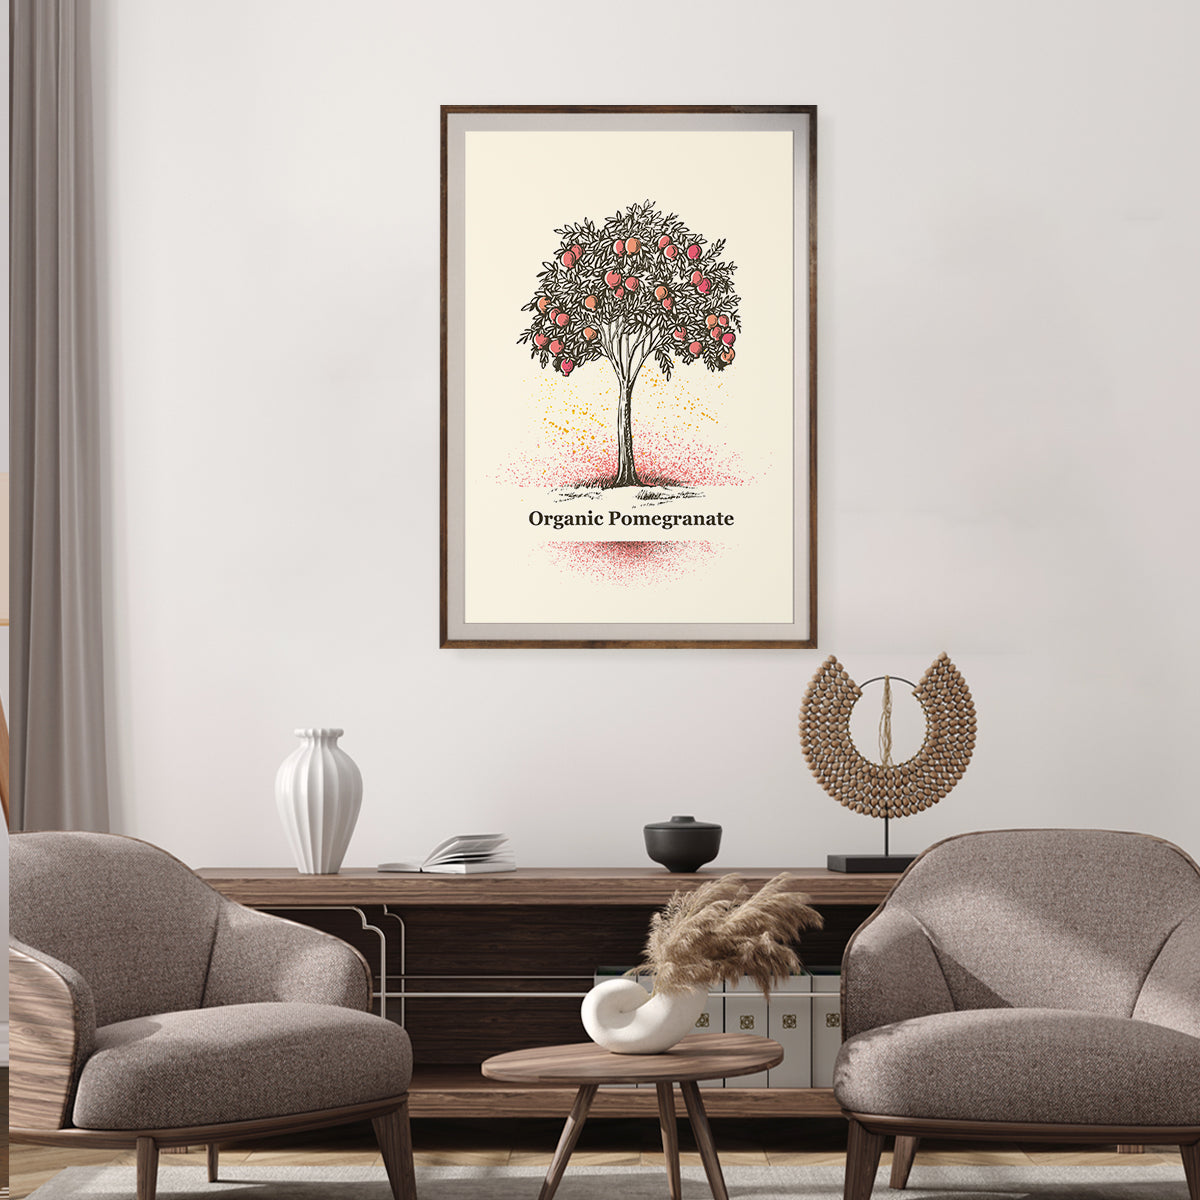 Pomegranate Tree Vintage Posters Decor For Room-Vertical Posters NOT FRAMED-CetArt-8″x10″ inches-CetArt